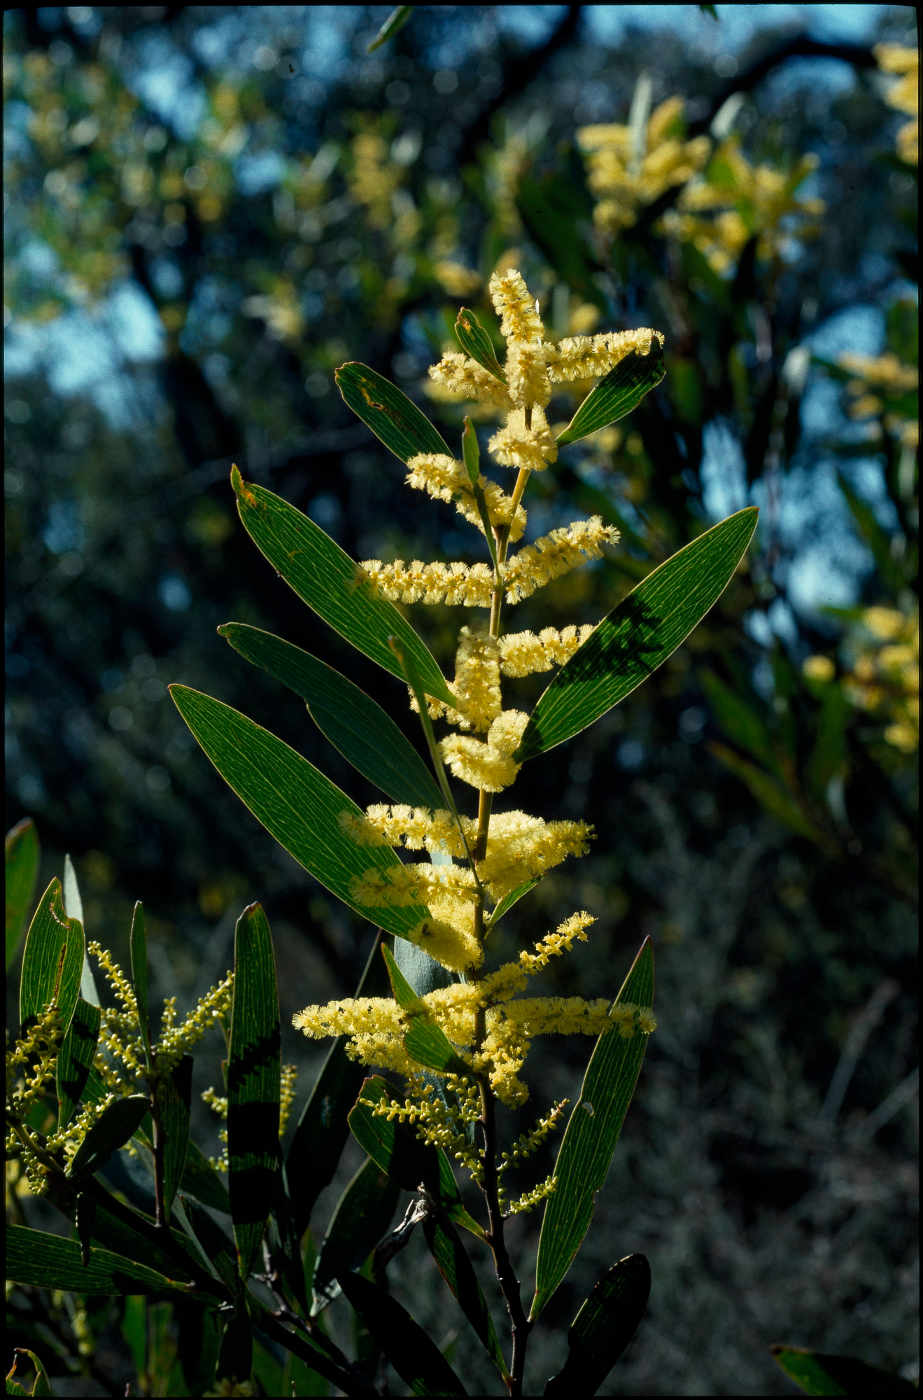 Colour photo of a branch of a wattle tree. - click to view larger image